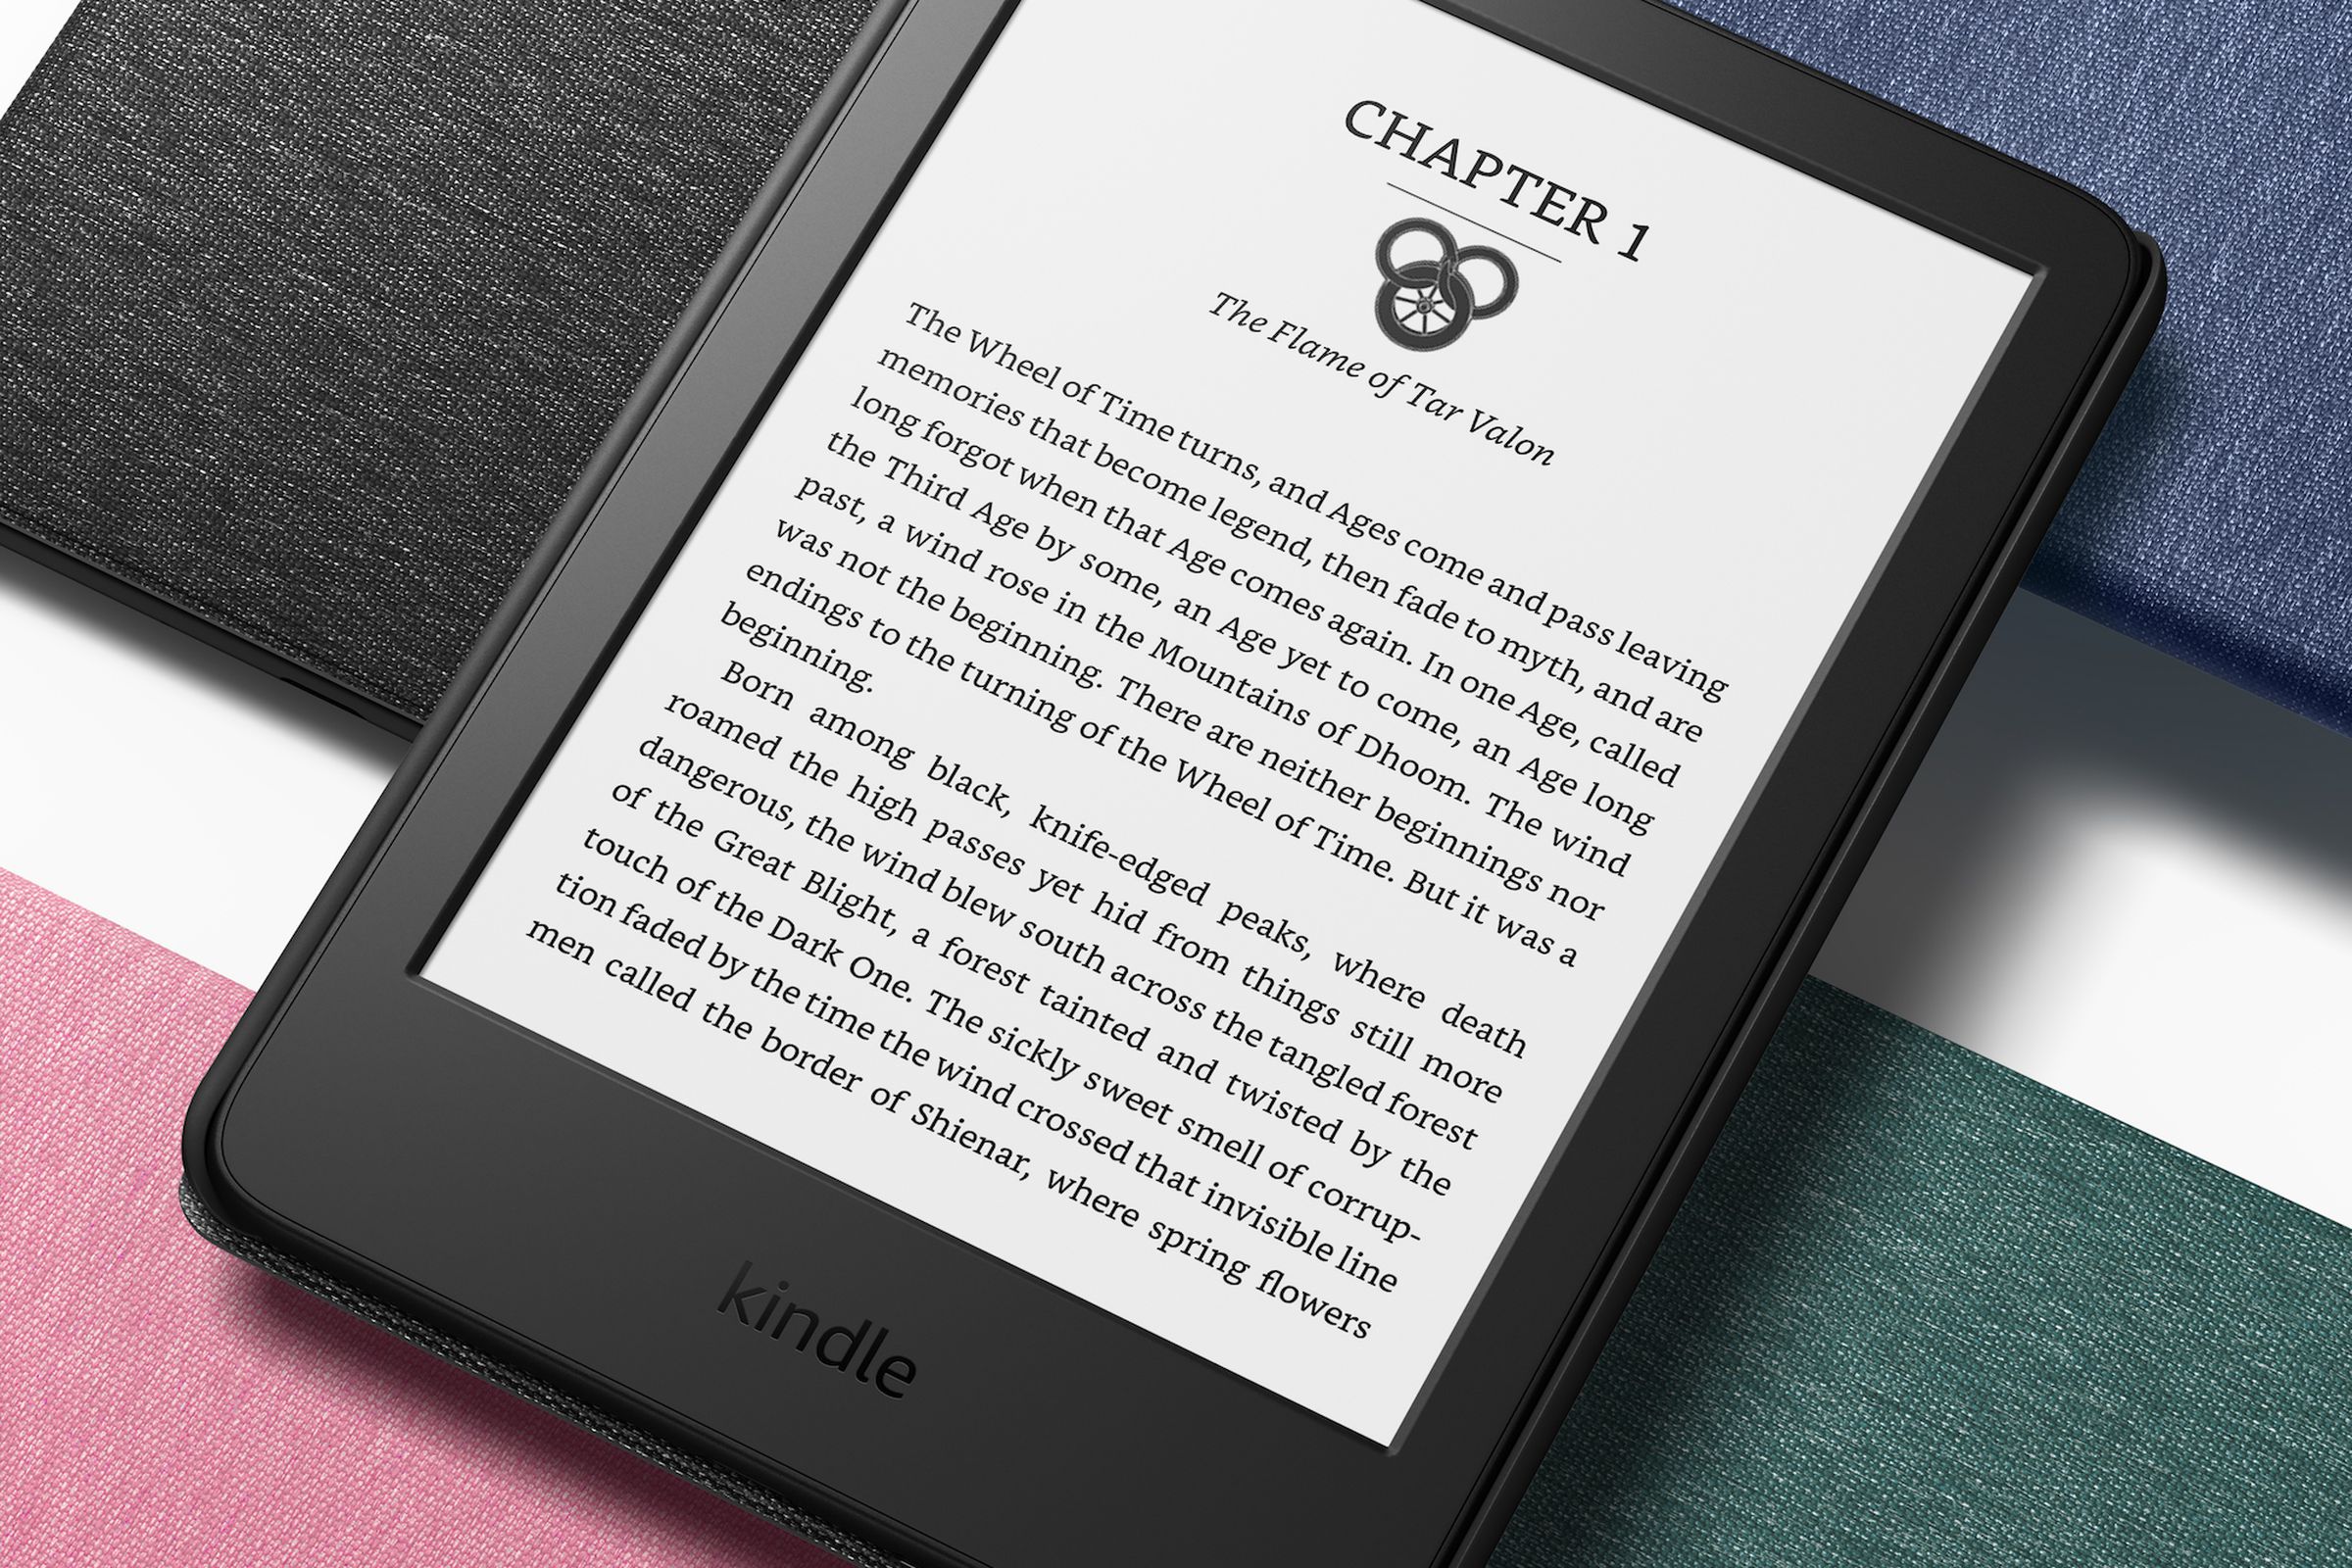 An Amazon Kindle on a colorful background.